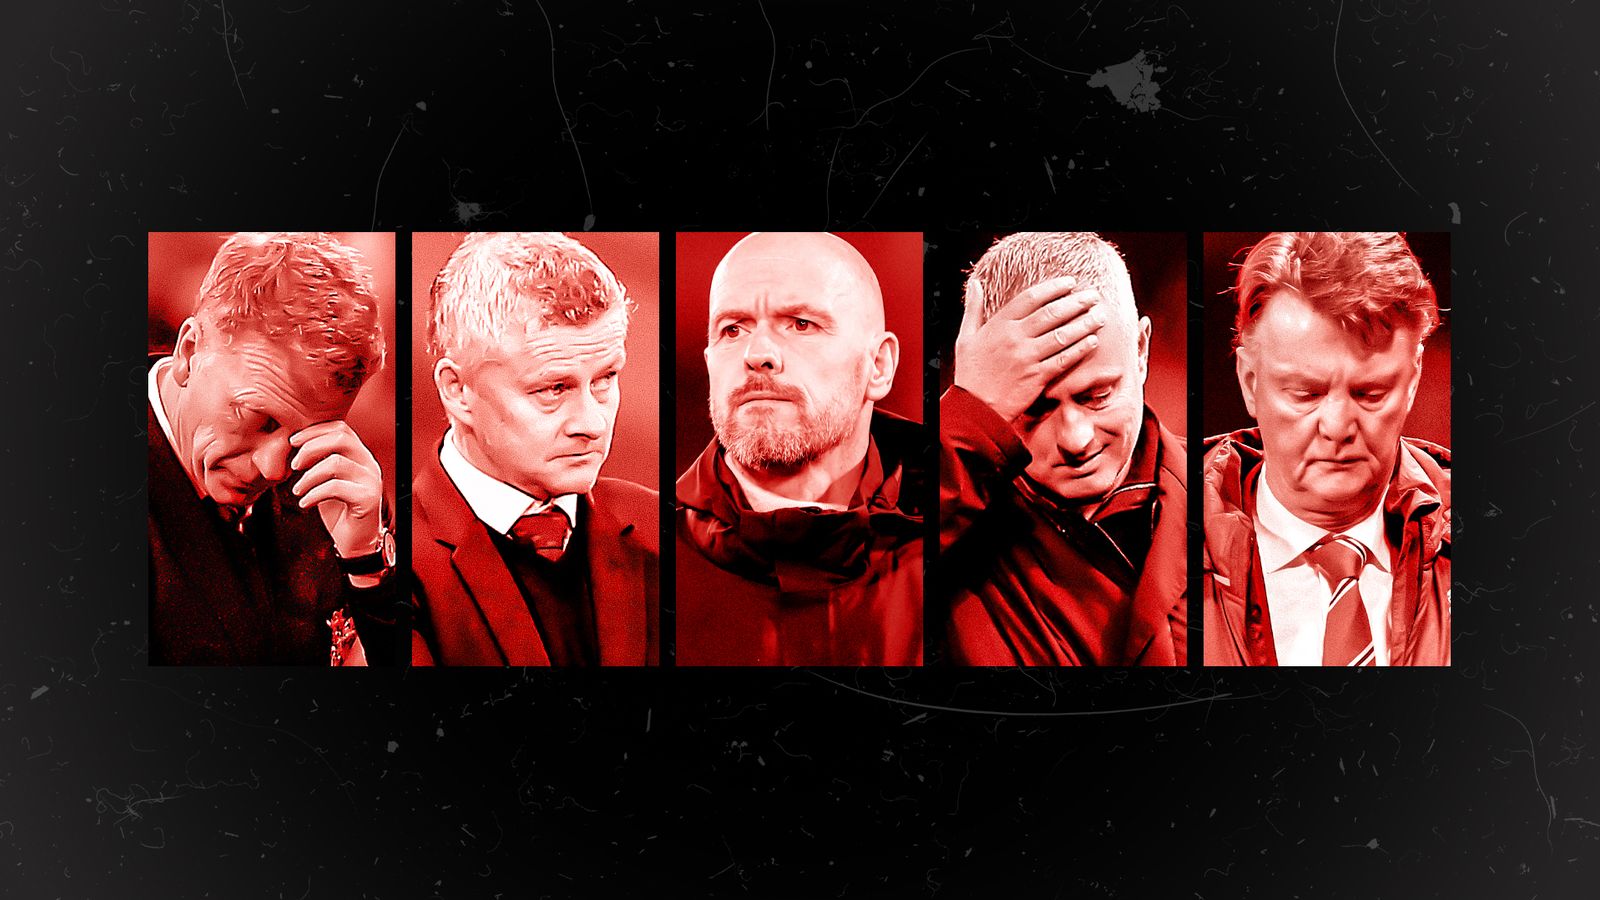 man-utd-s-decade-in-the-dark-gbp1-43bn-spent-five-managers-and-no-title